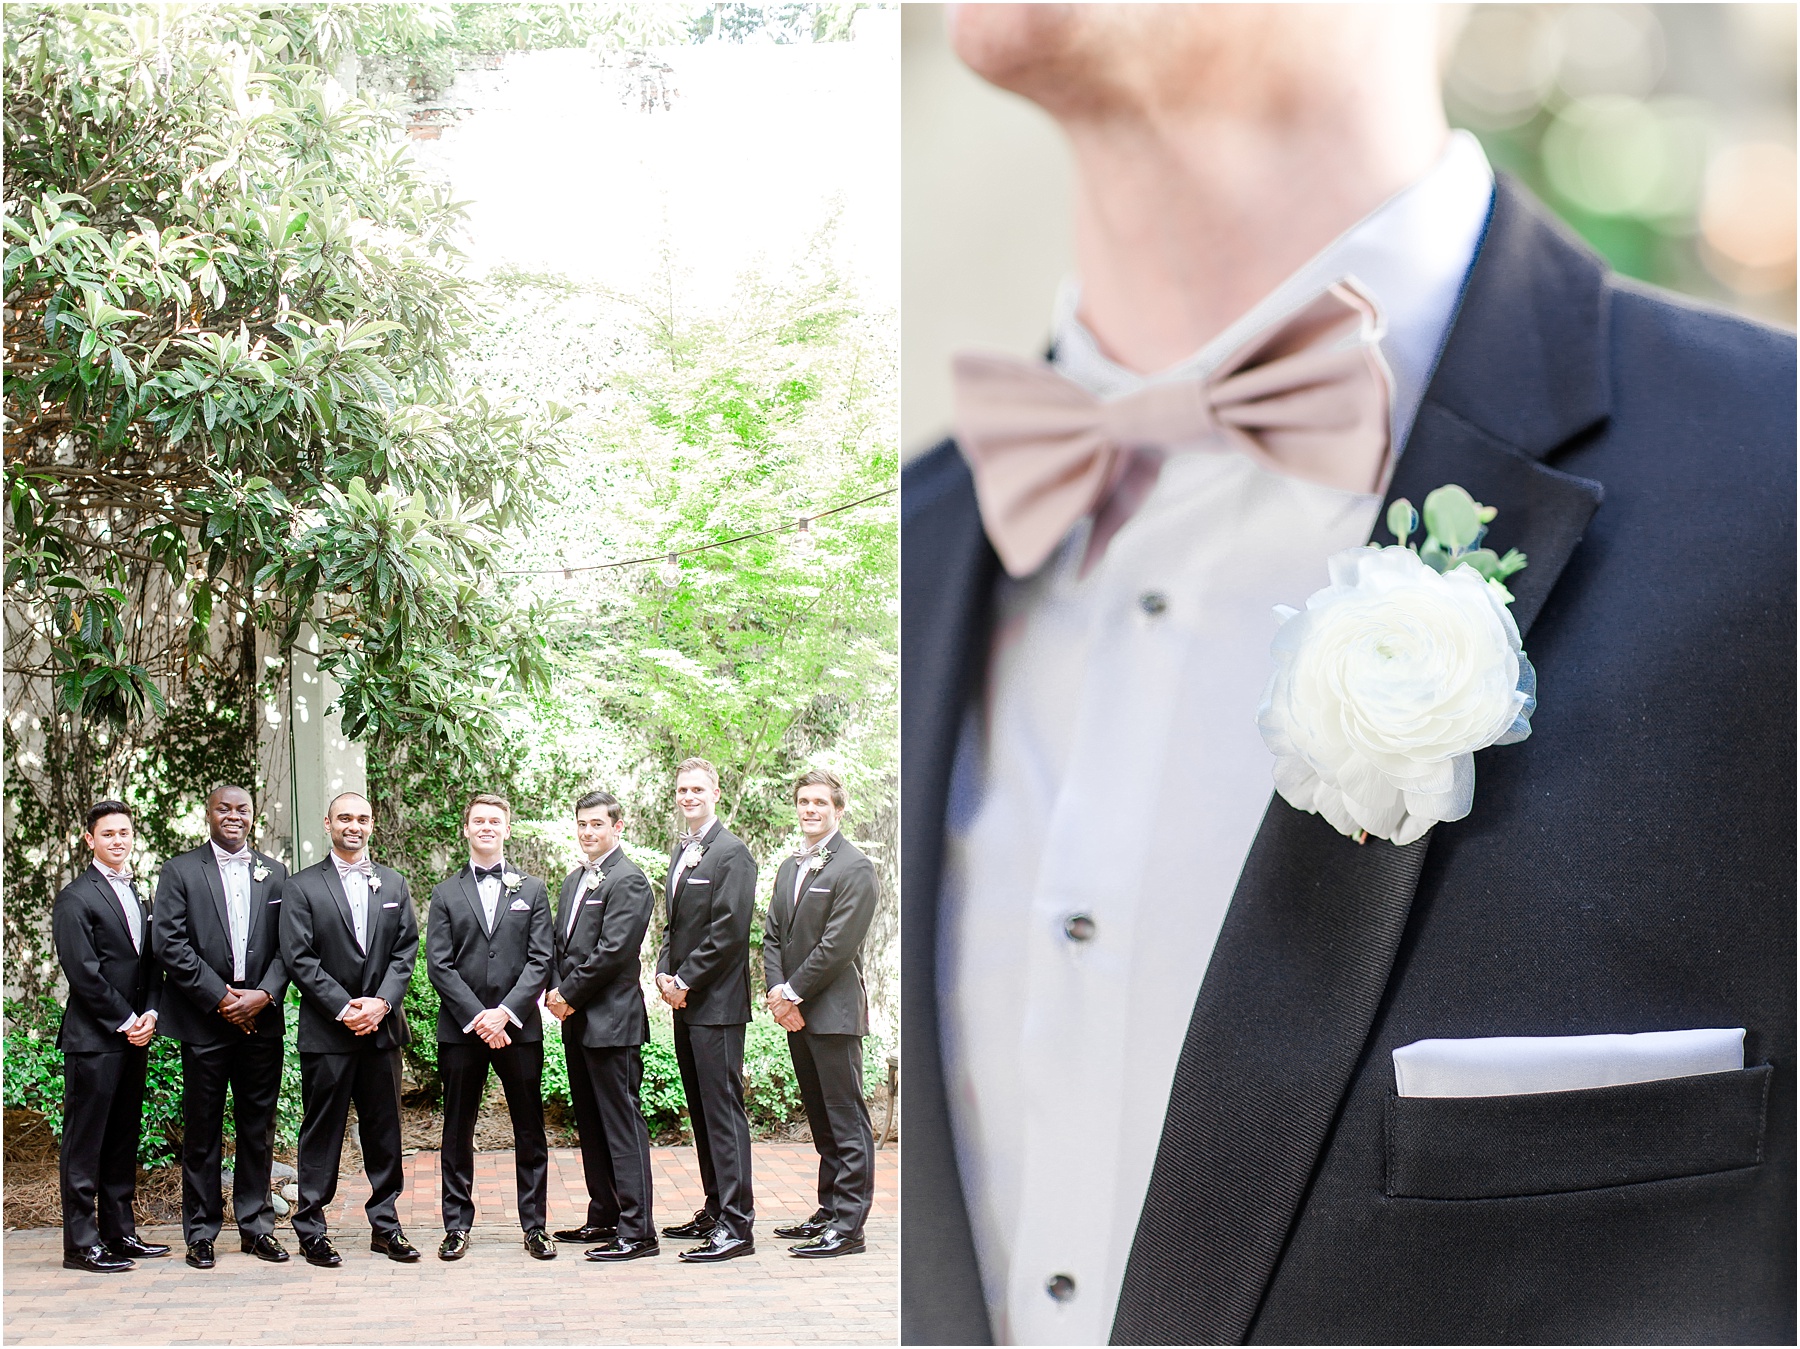 Bakery 105 and The Cottage Groomsmen in Classic Black and White Tux